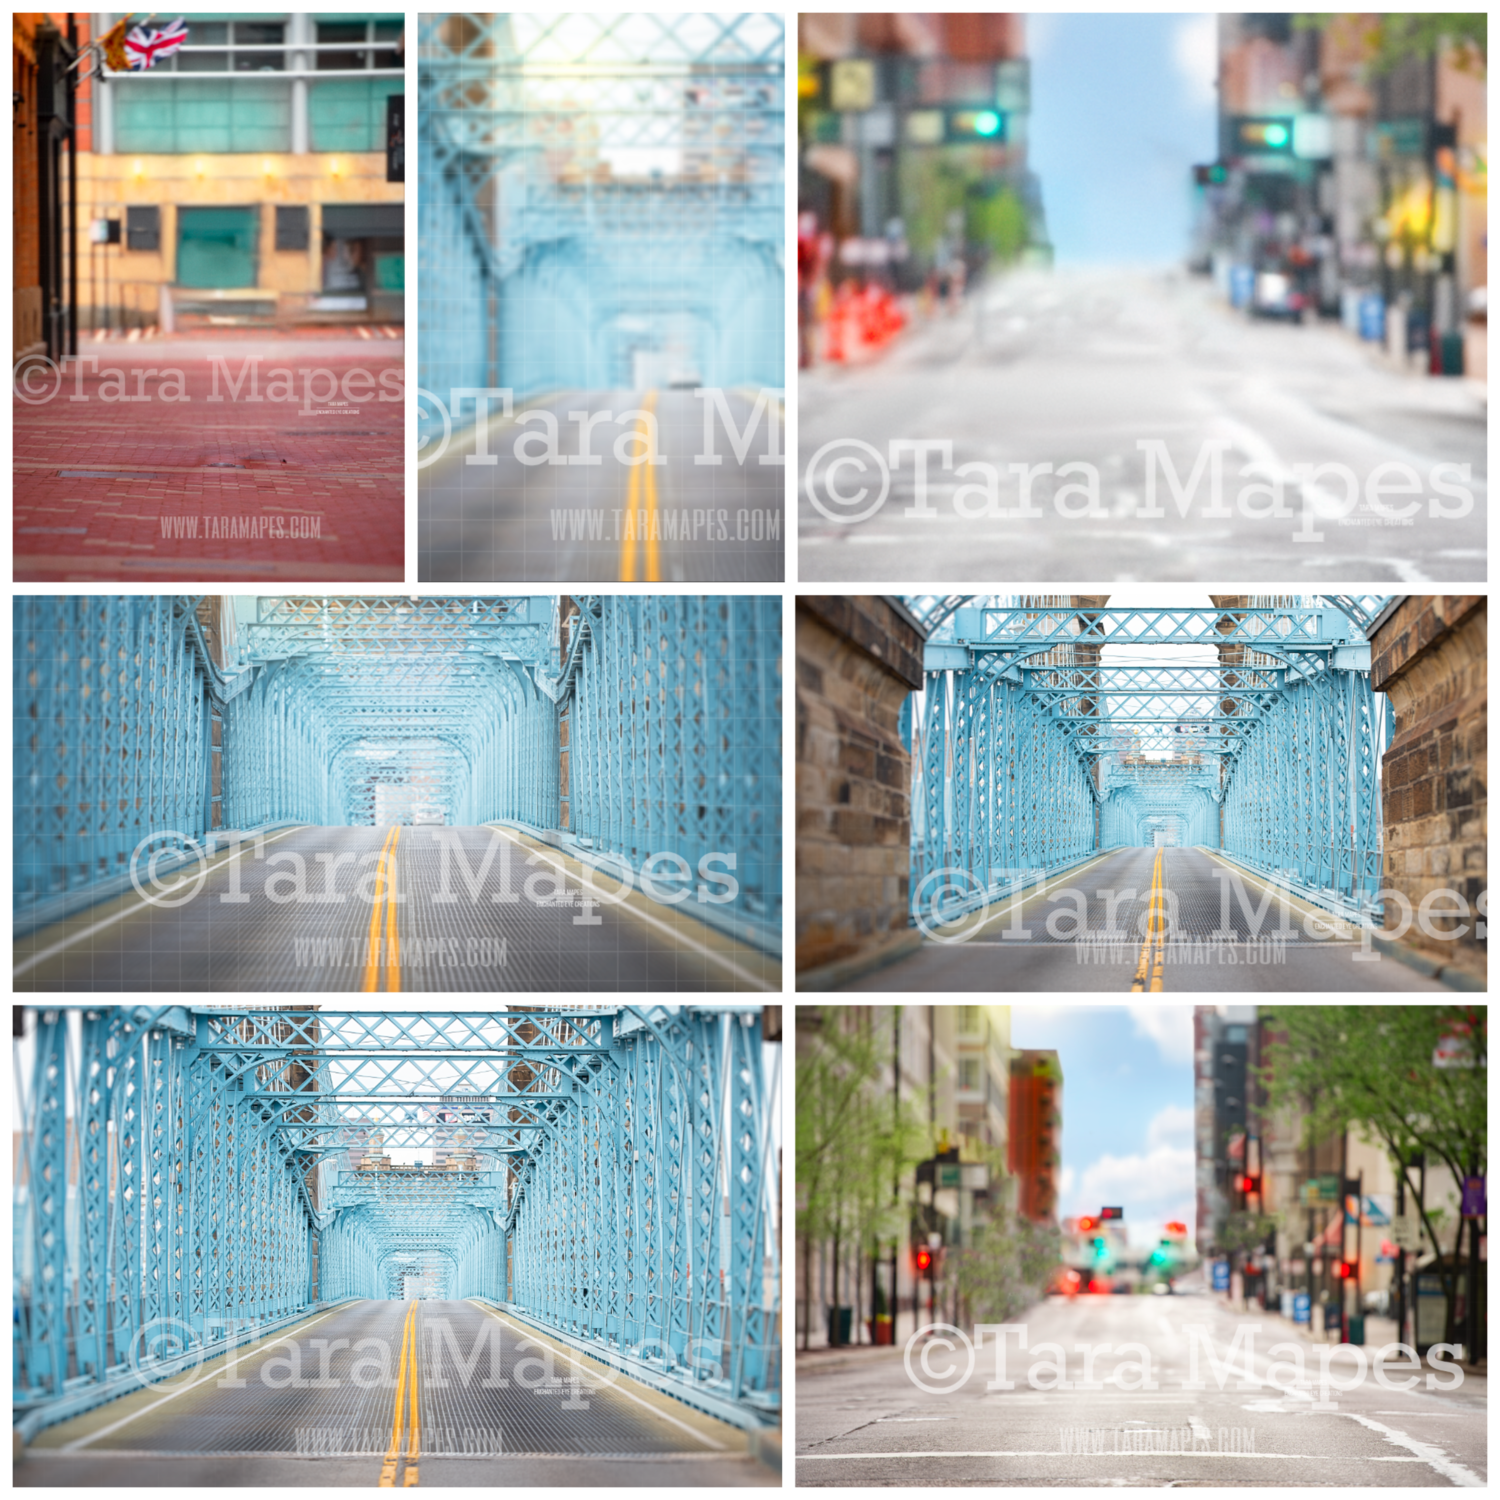 7 PACK of City Landscapes: City Street, City Alley, City Bridge Digital Background Backdrops - Colorful City with Traffic Lights Street, Alley and Bridge for Portraits Digital Background